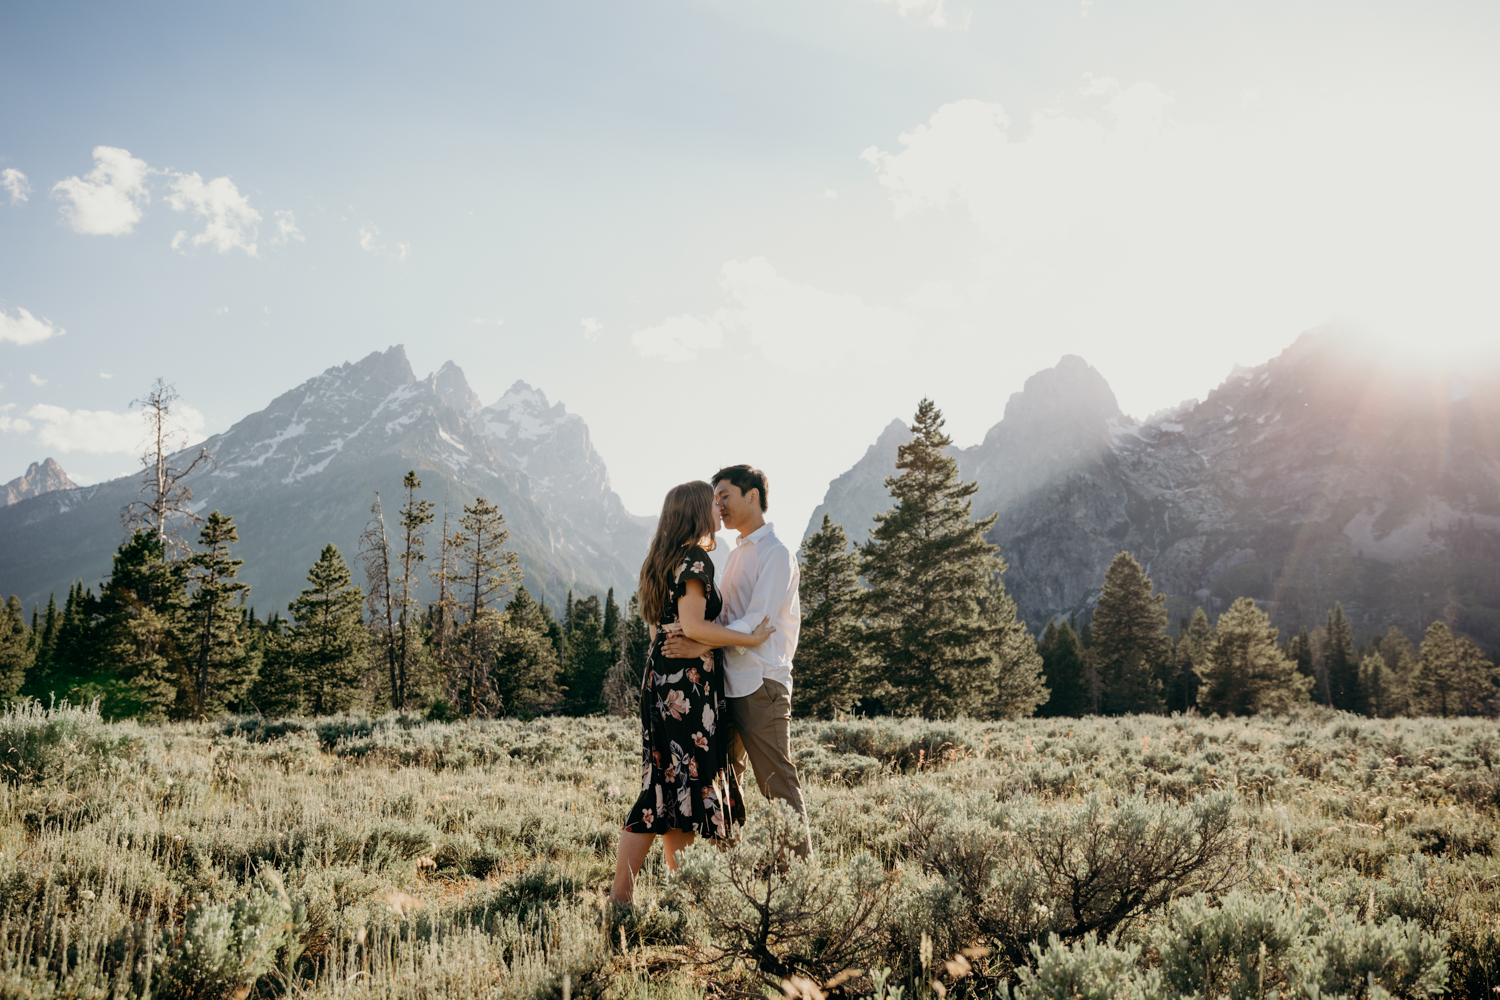 Pizza Date Engagement in the Tetons | Michael & Amber - Erin Wheat Co.